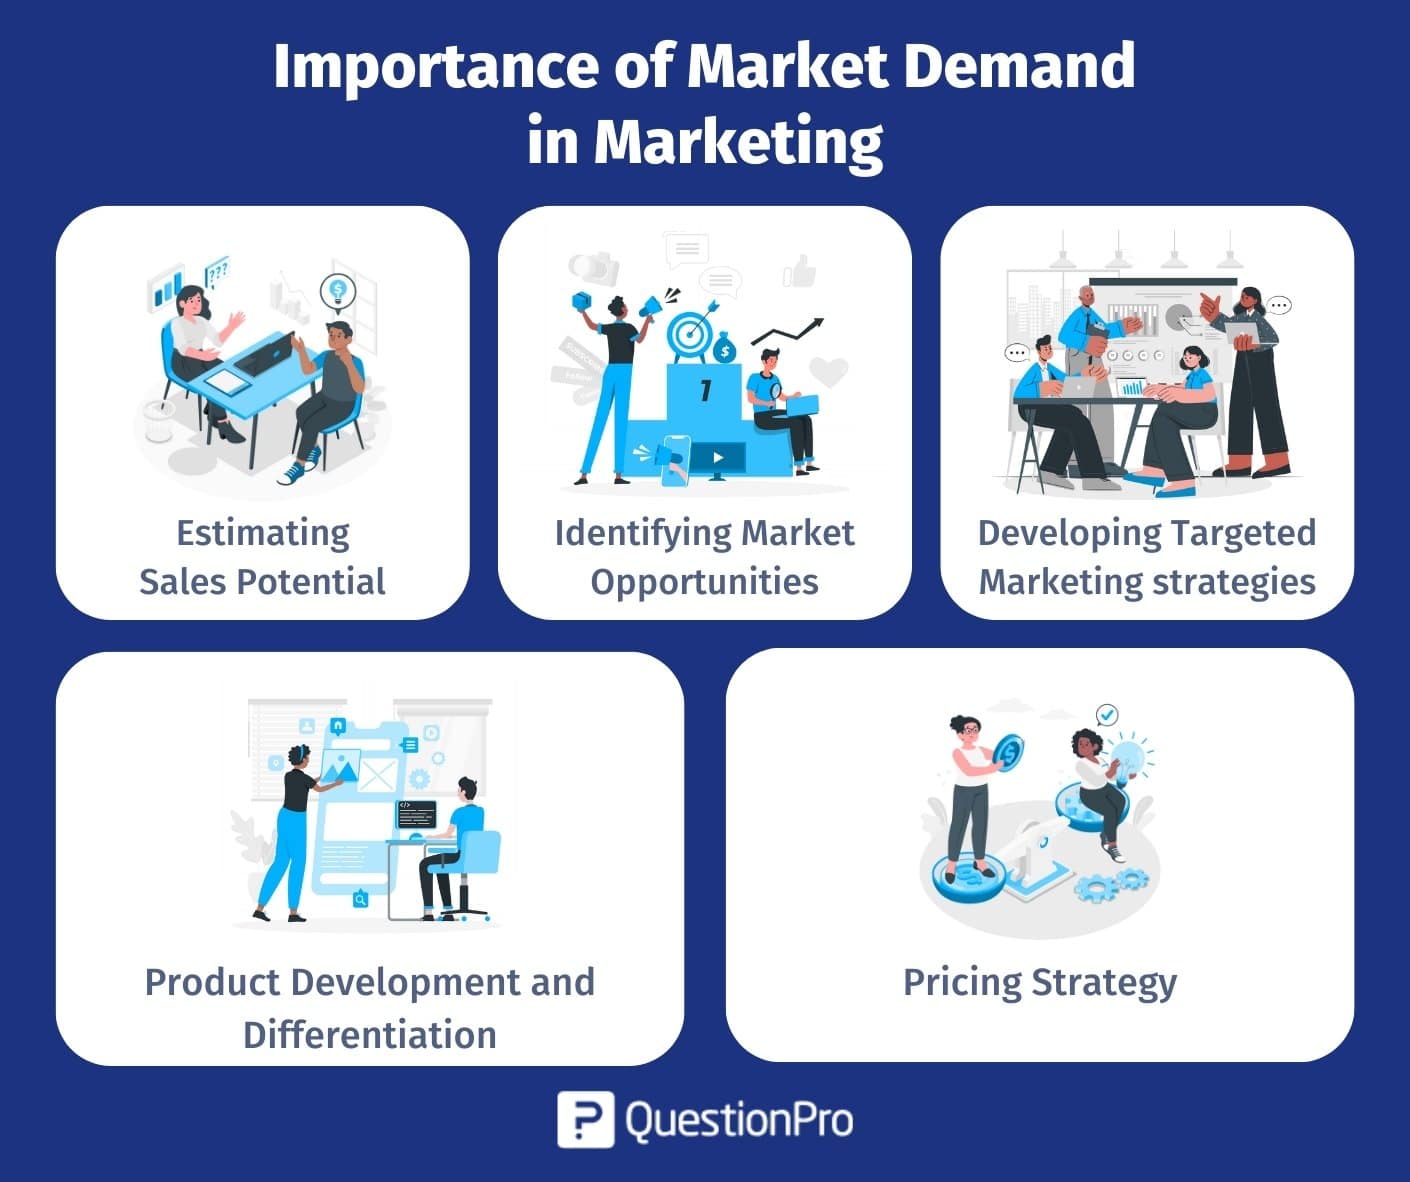 Market Demand: Definition, Strategies, & How to Calculate